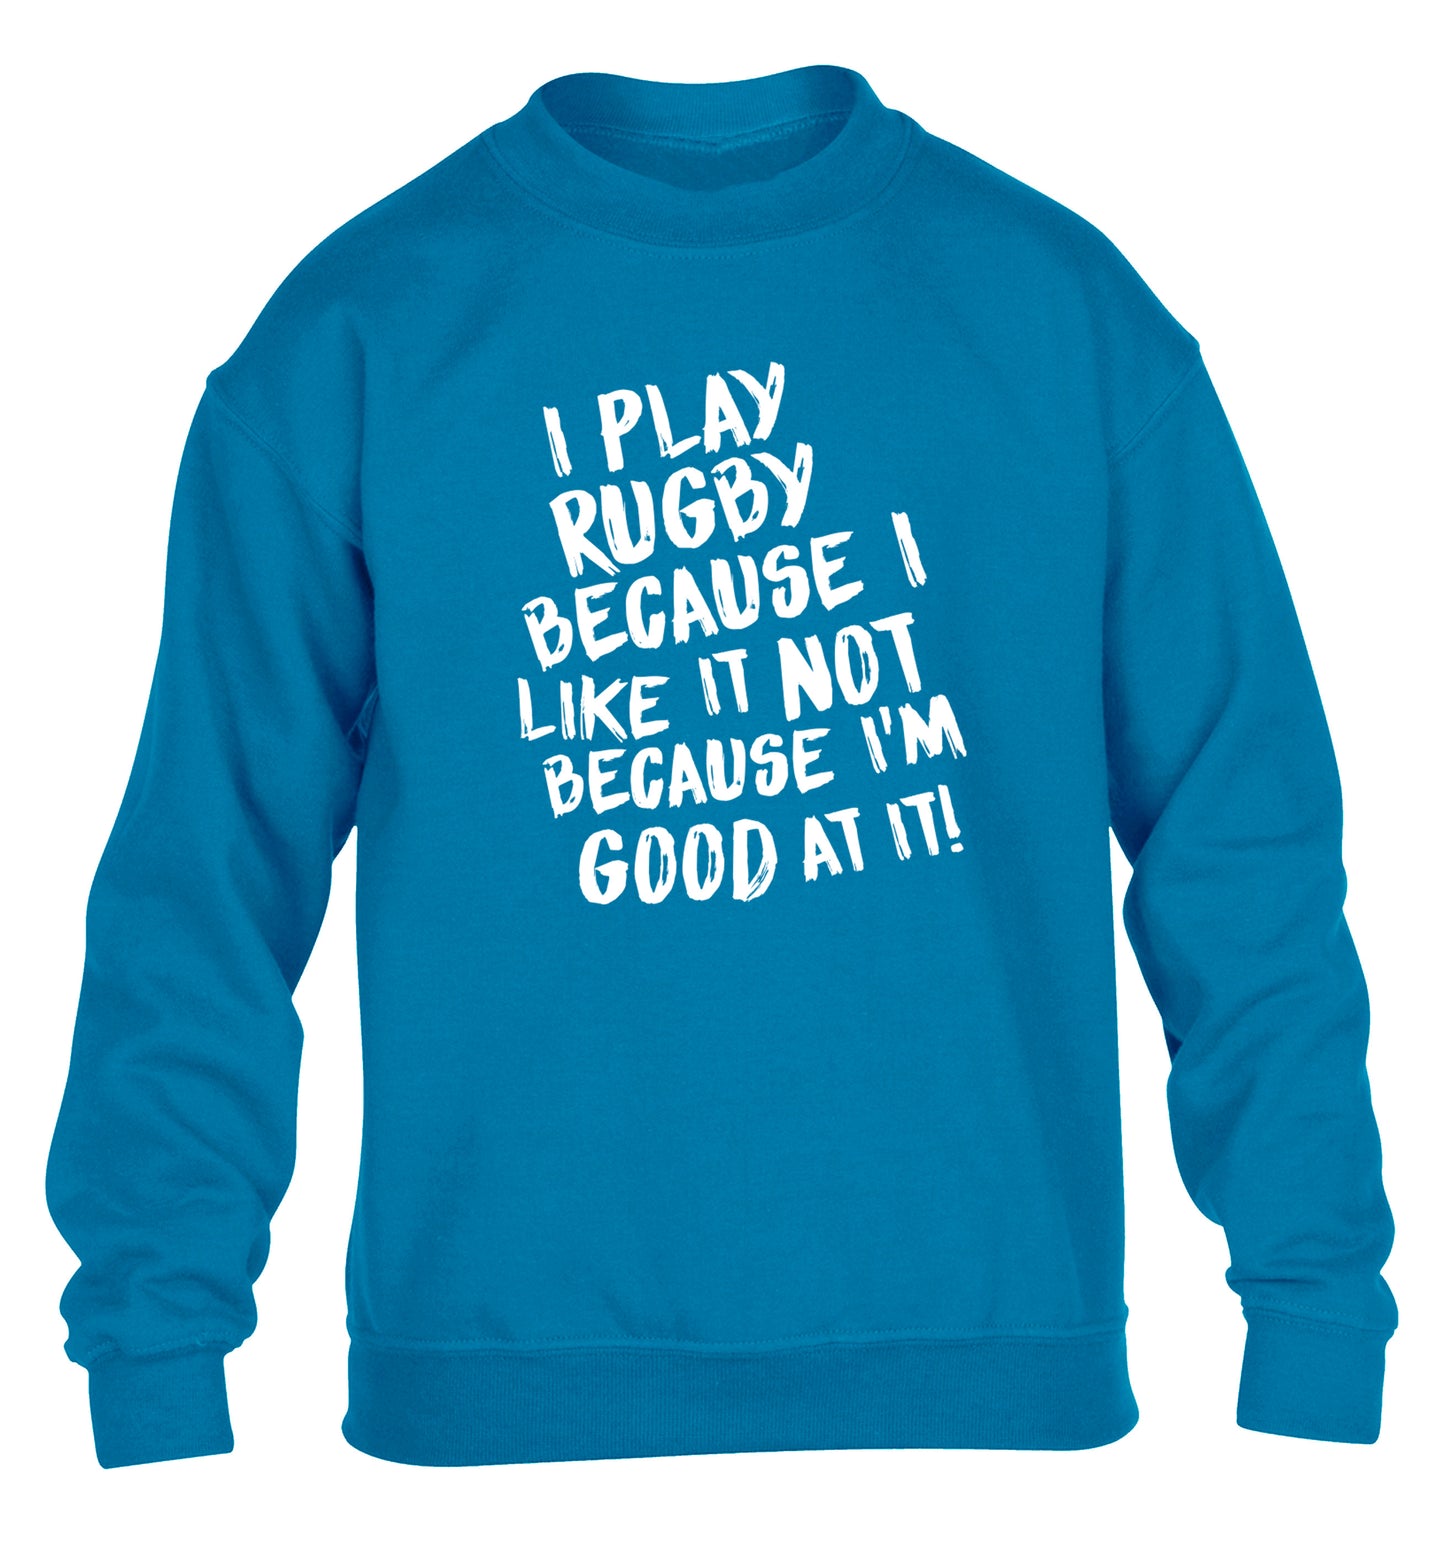 I play rugby because I like it not because I'm good at it children's blue sweater 12-13 Years